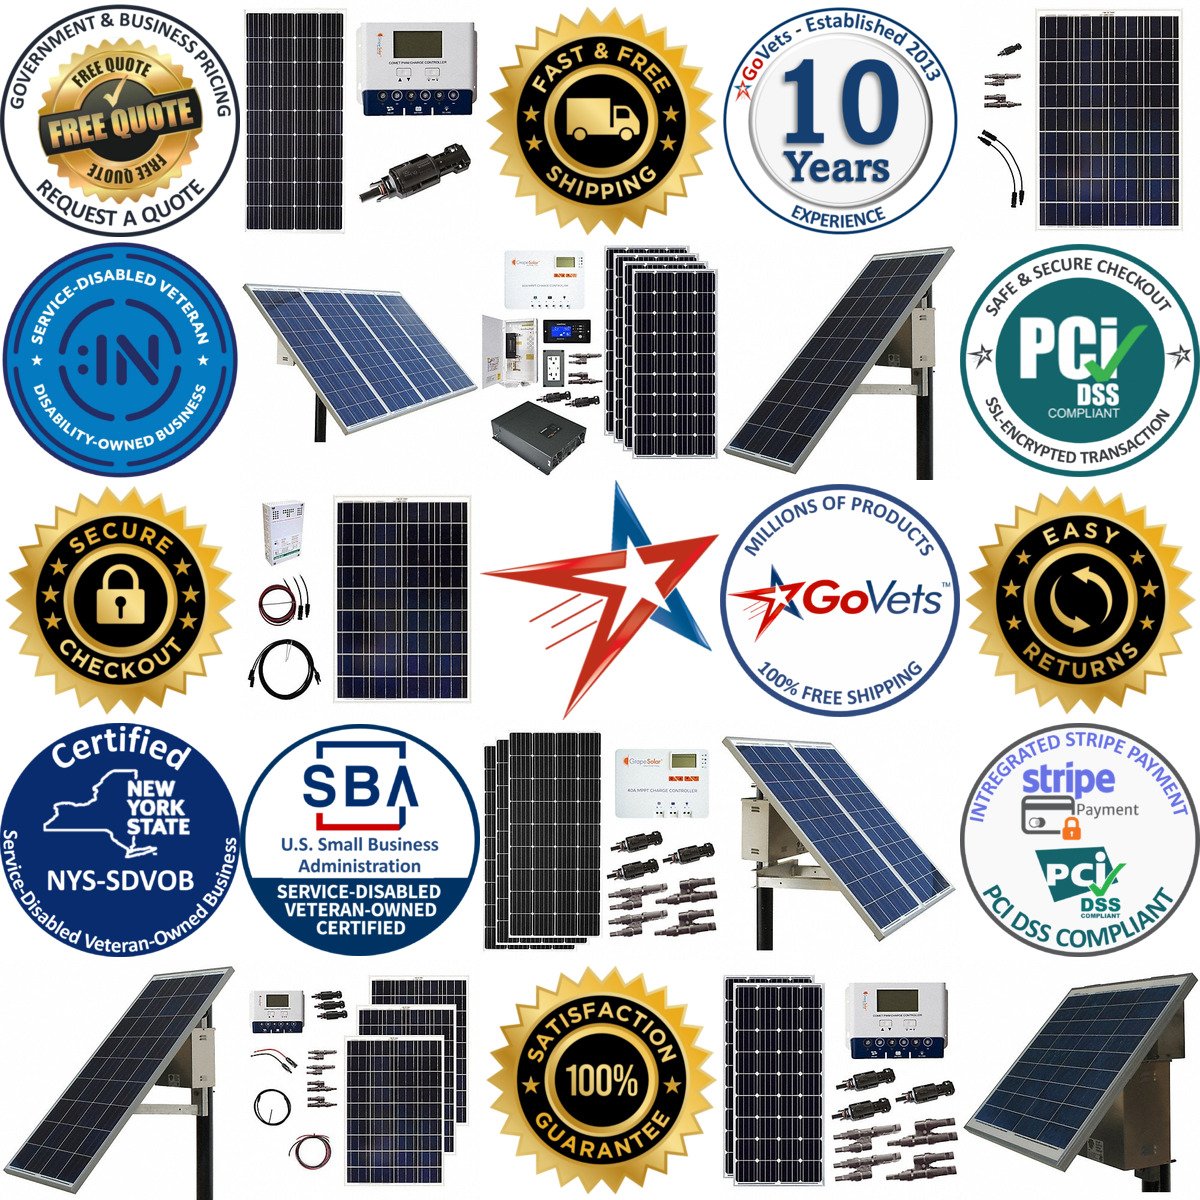 A selection of Solar Panel Kits products on GoVets